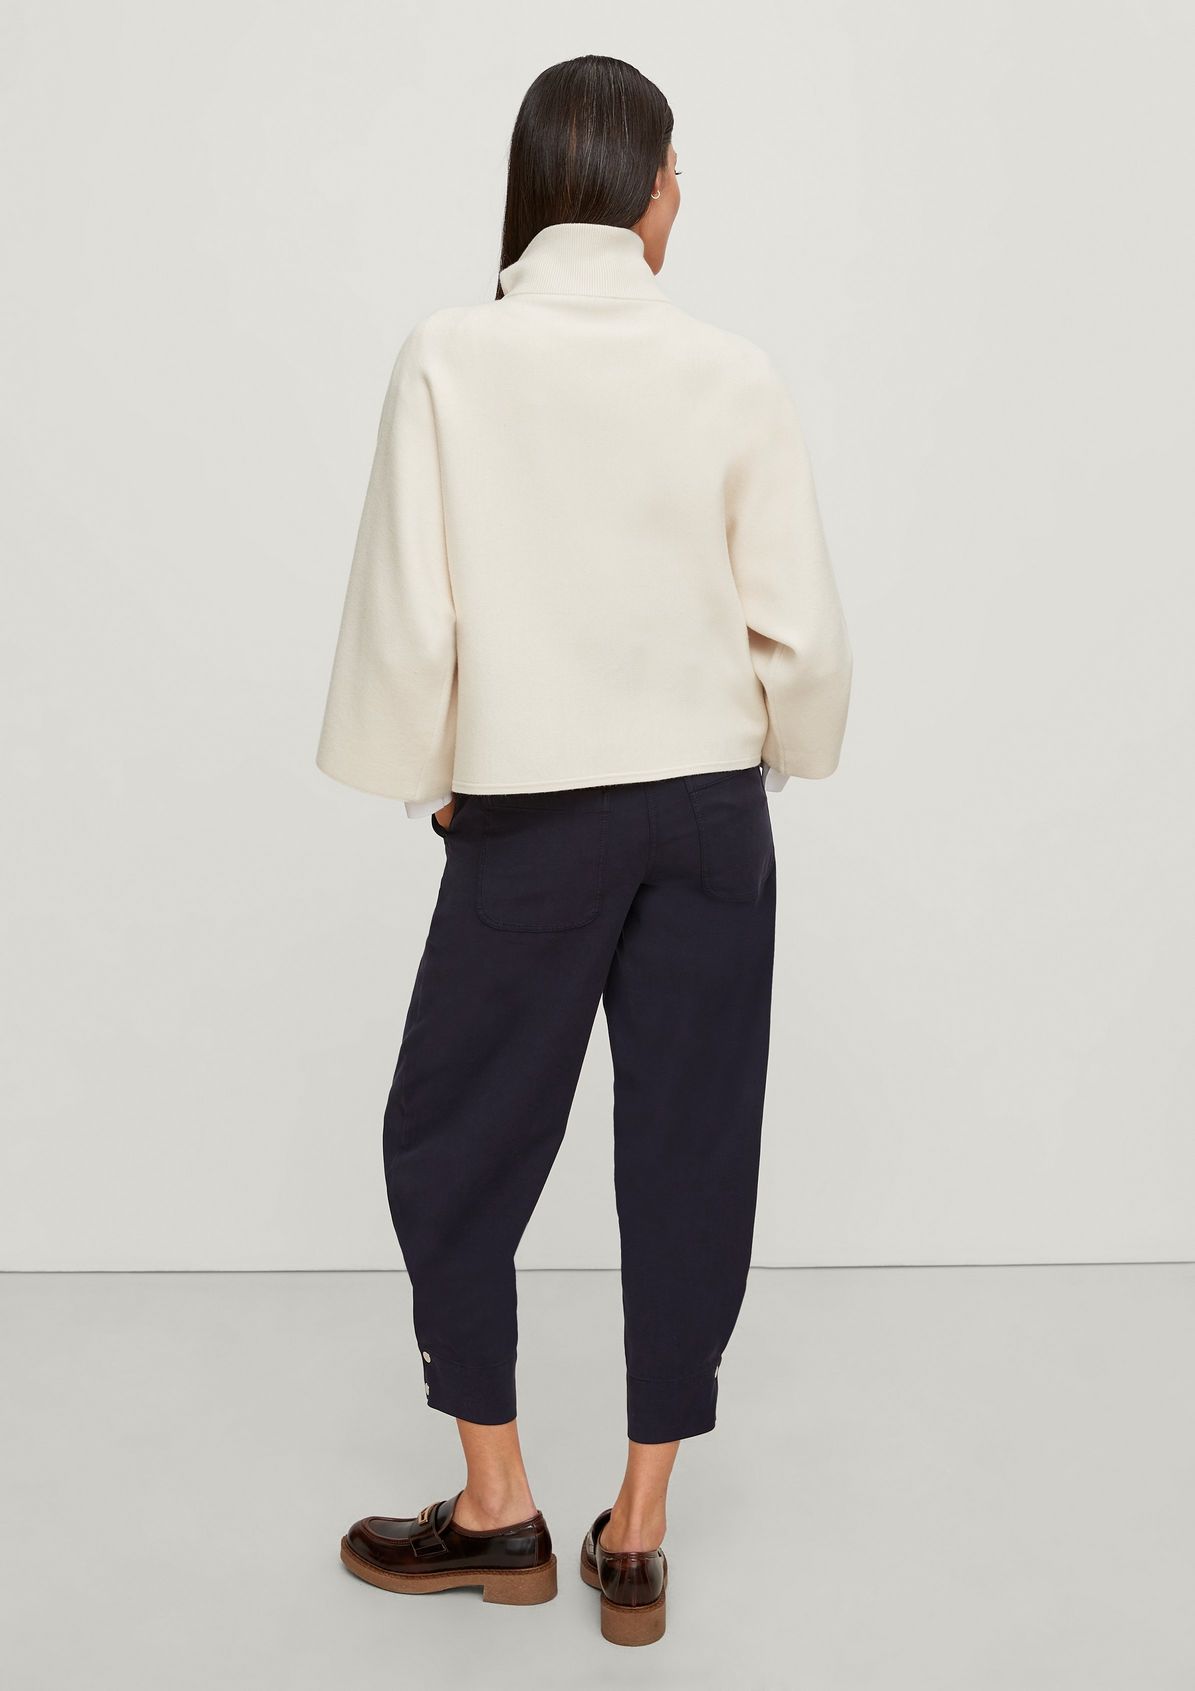 Fine knit jumper with a stand-up collar from comma